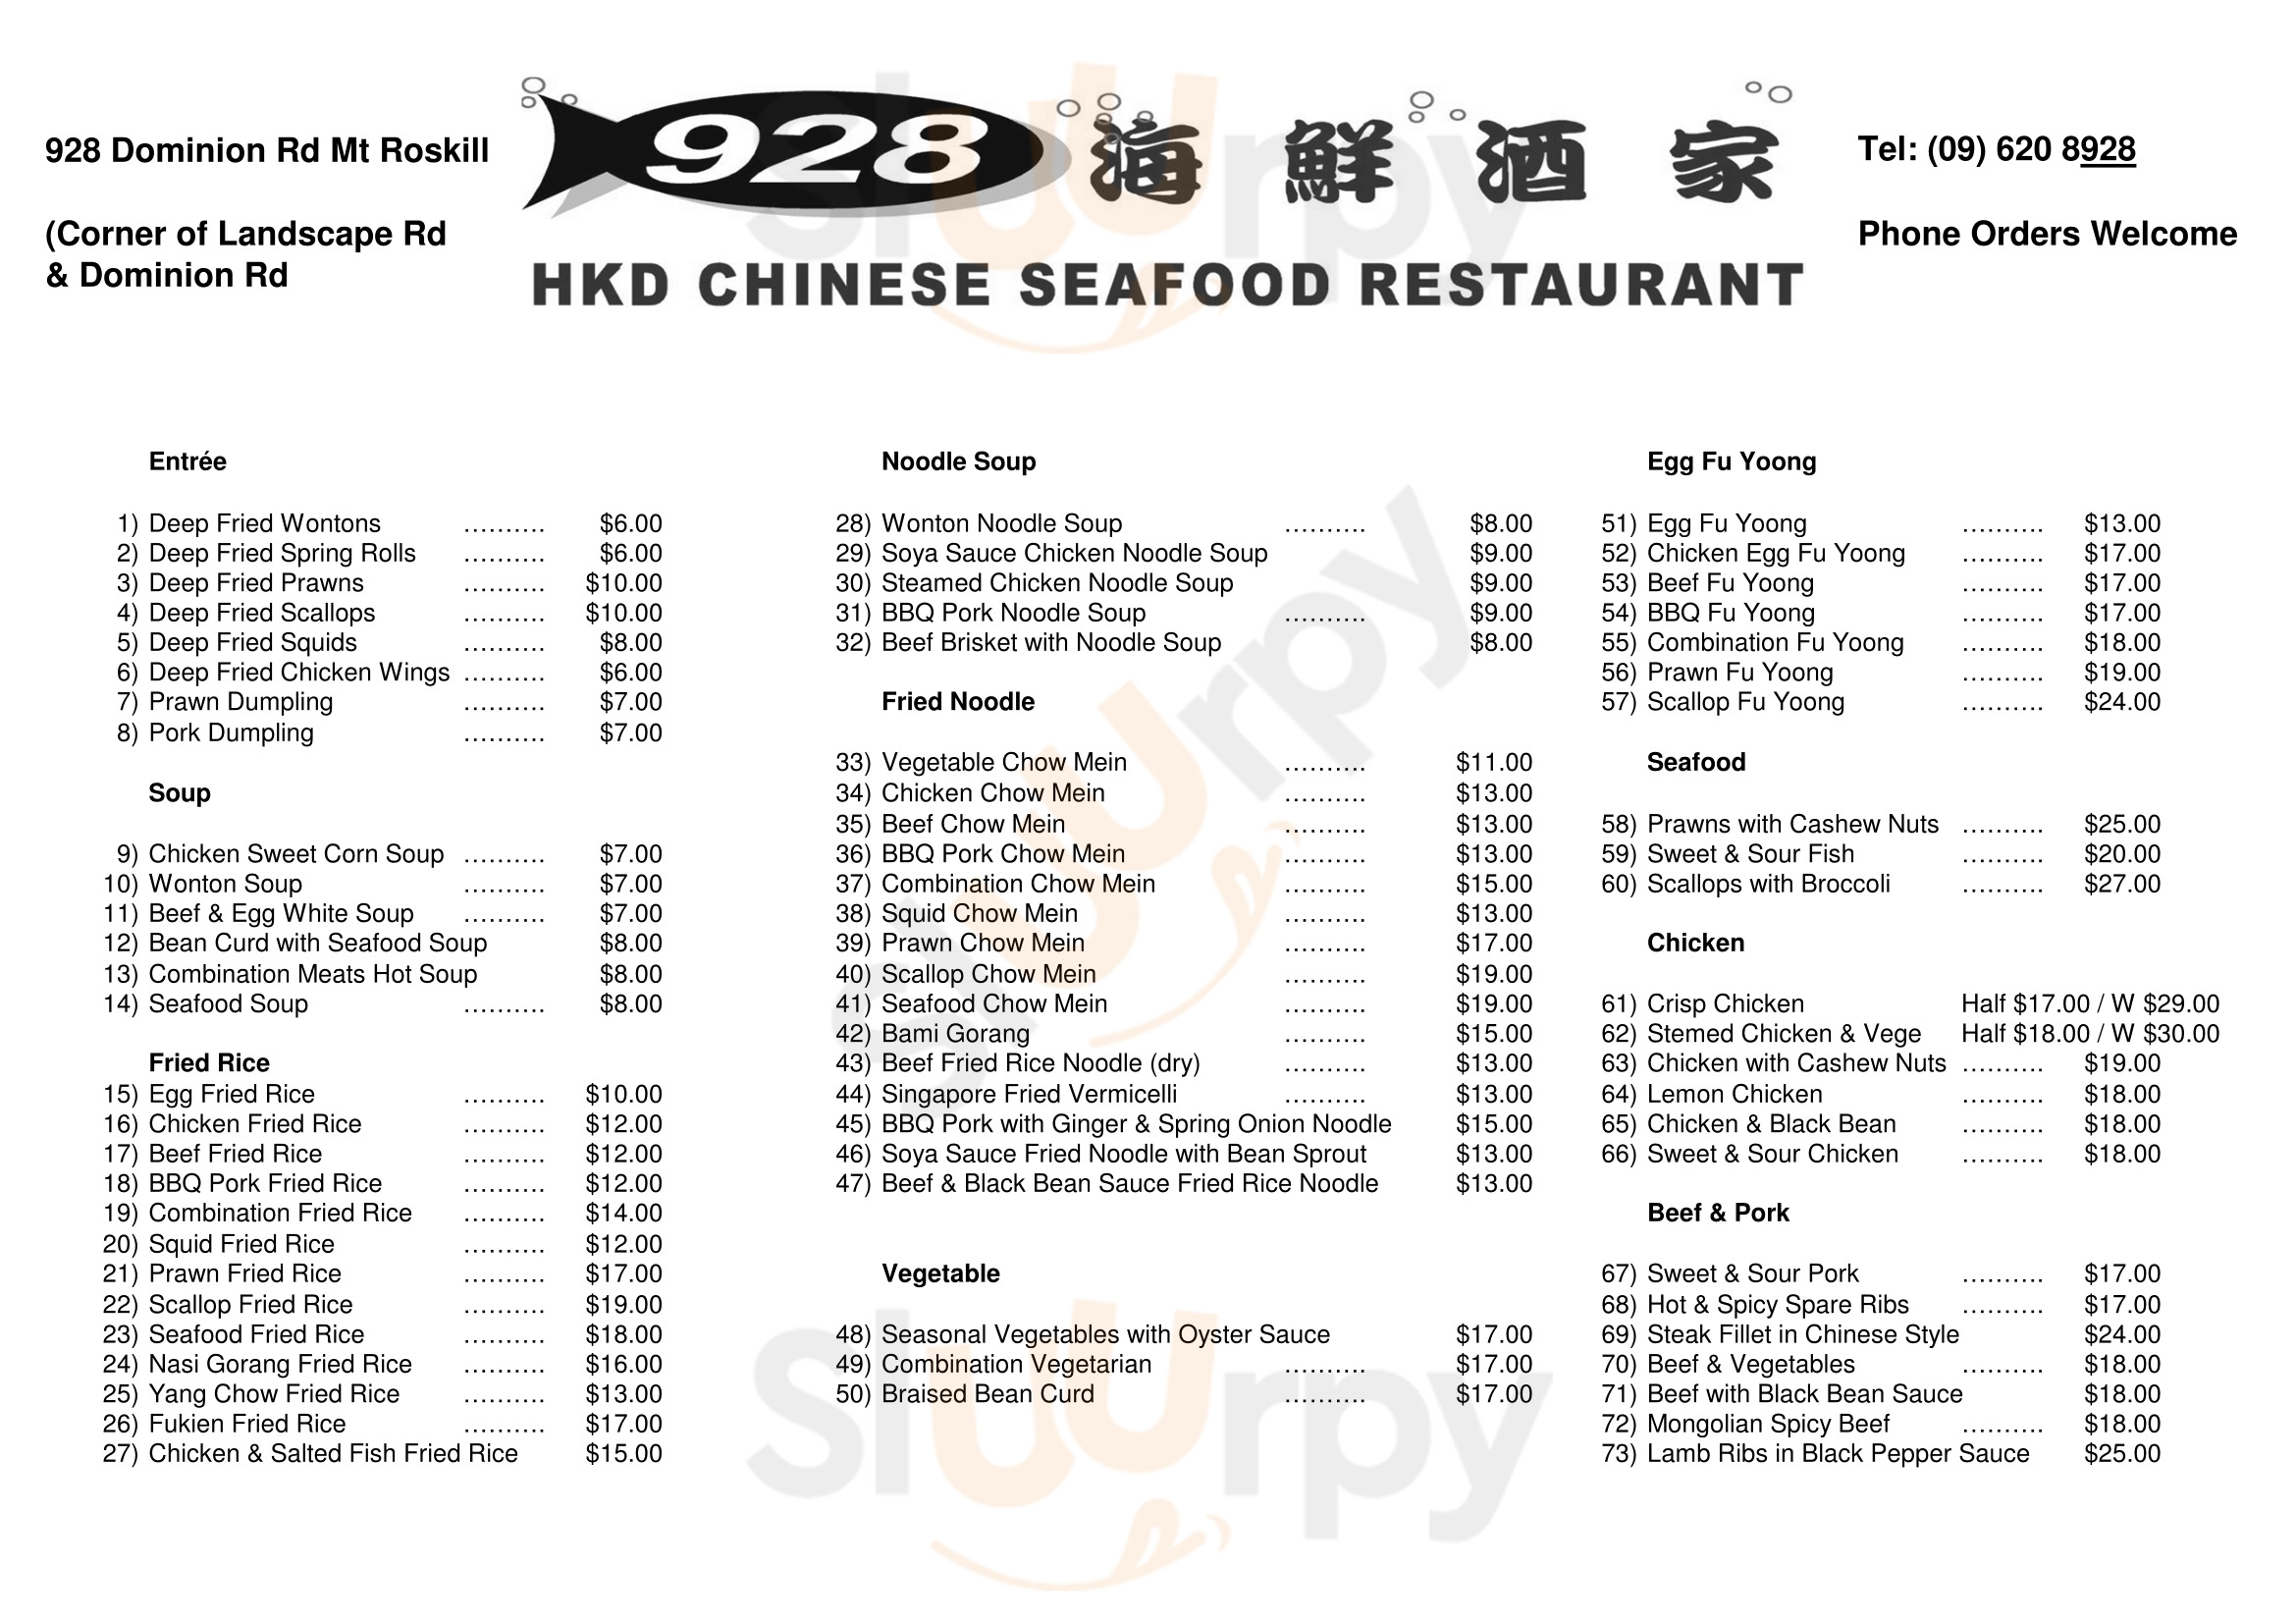 Hkd Chinese Seafood Restaurant Auckland Central Menu - 1